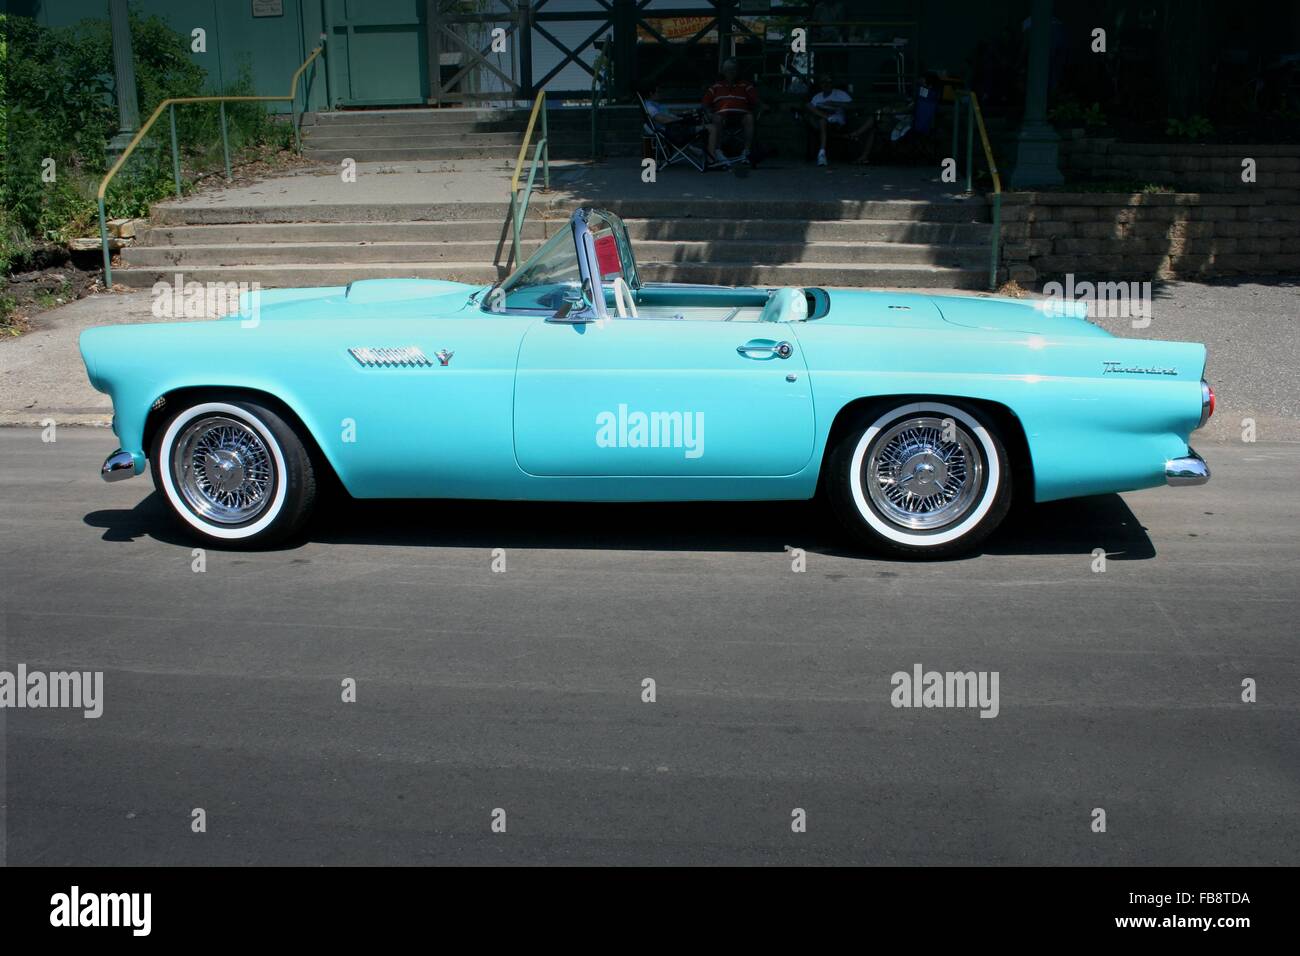 1955 classic car an aqua 'turquoise' blue Ford Thunderbird convertible with the top down in summer Stock Photo